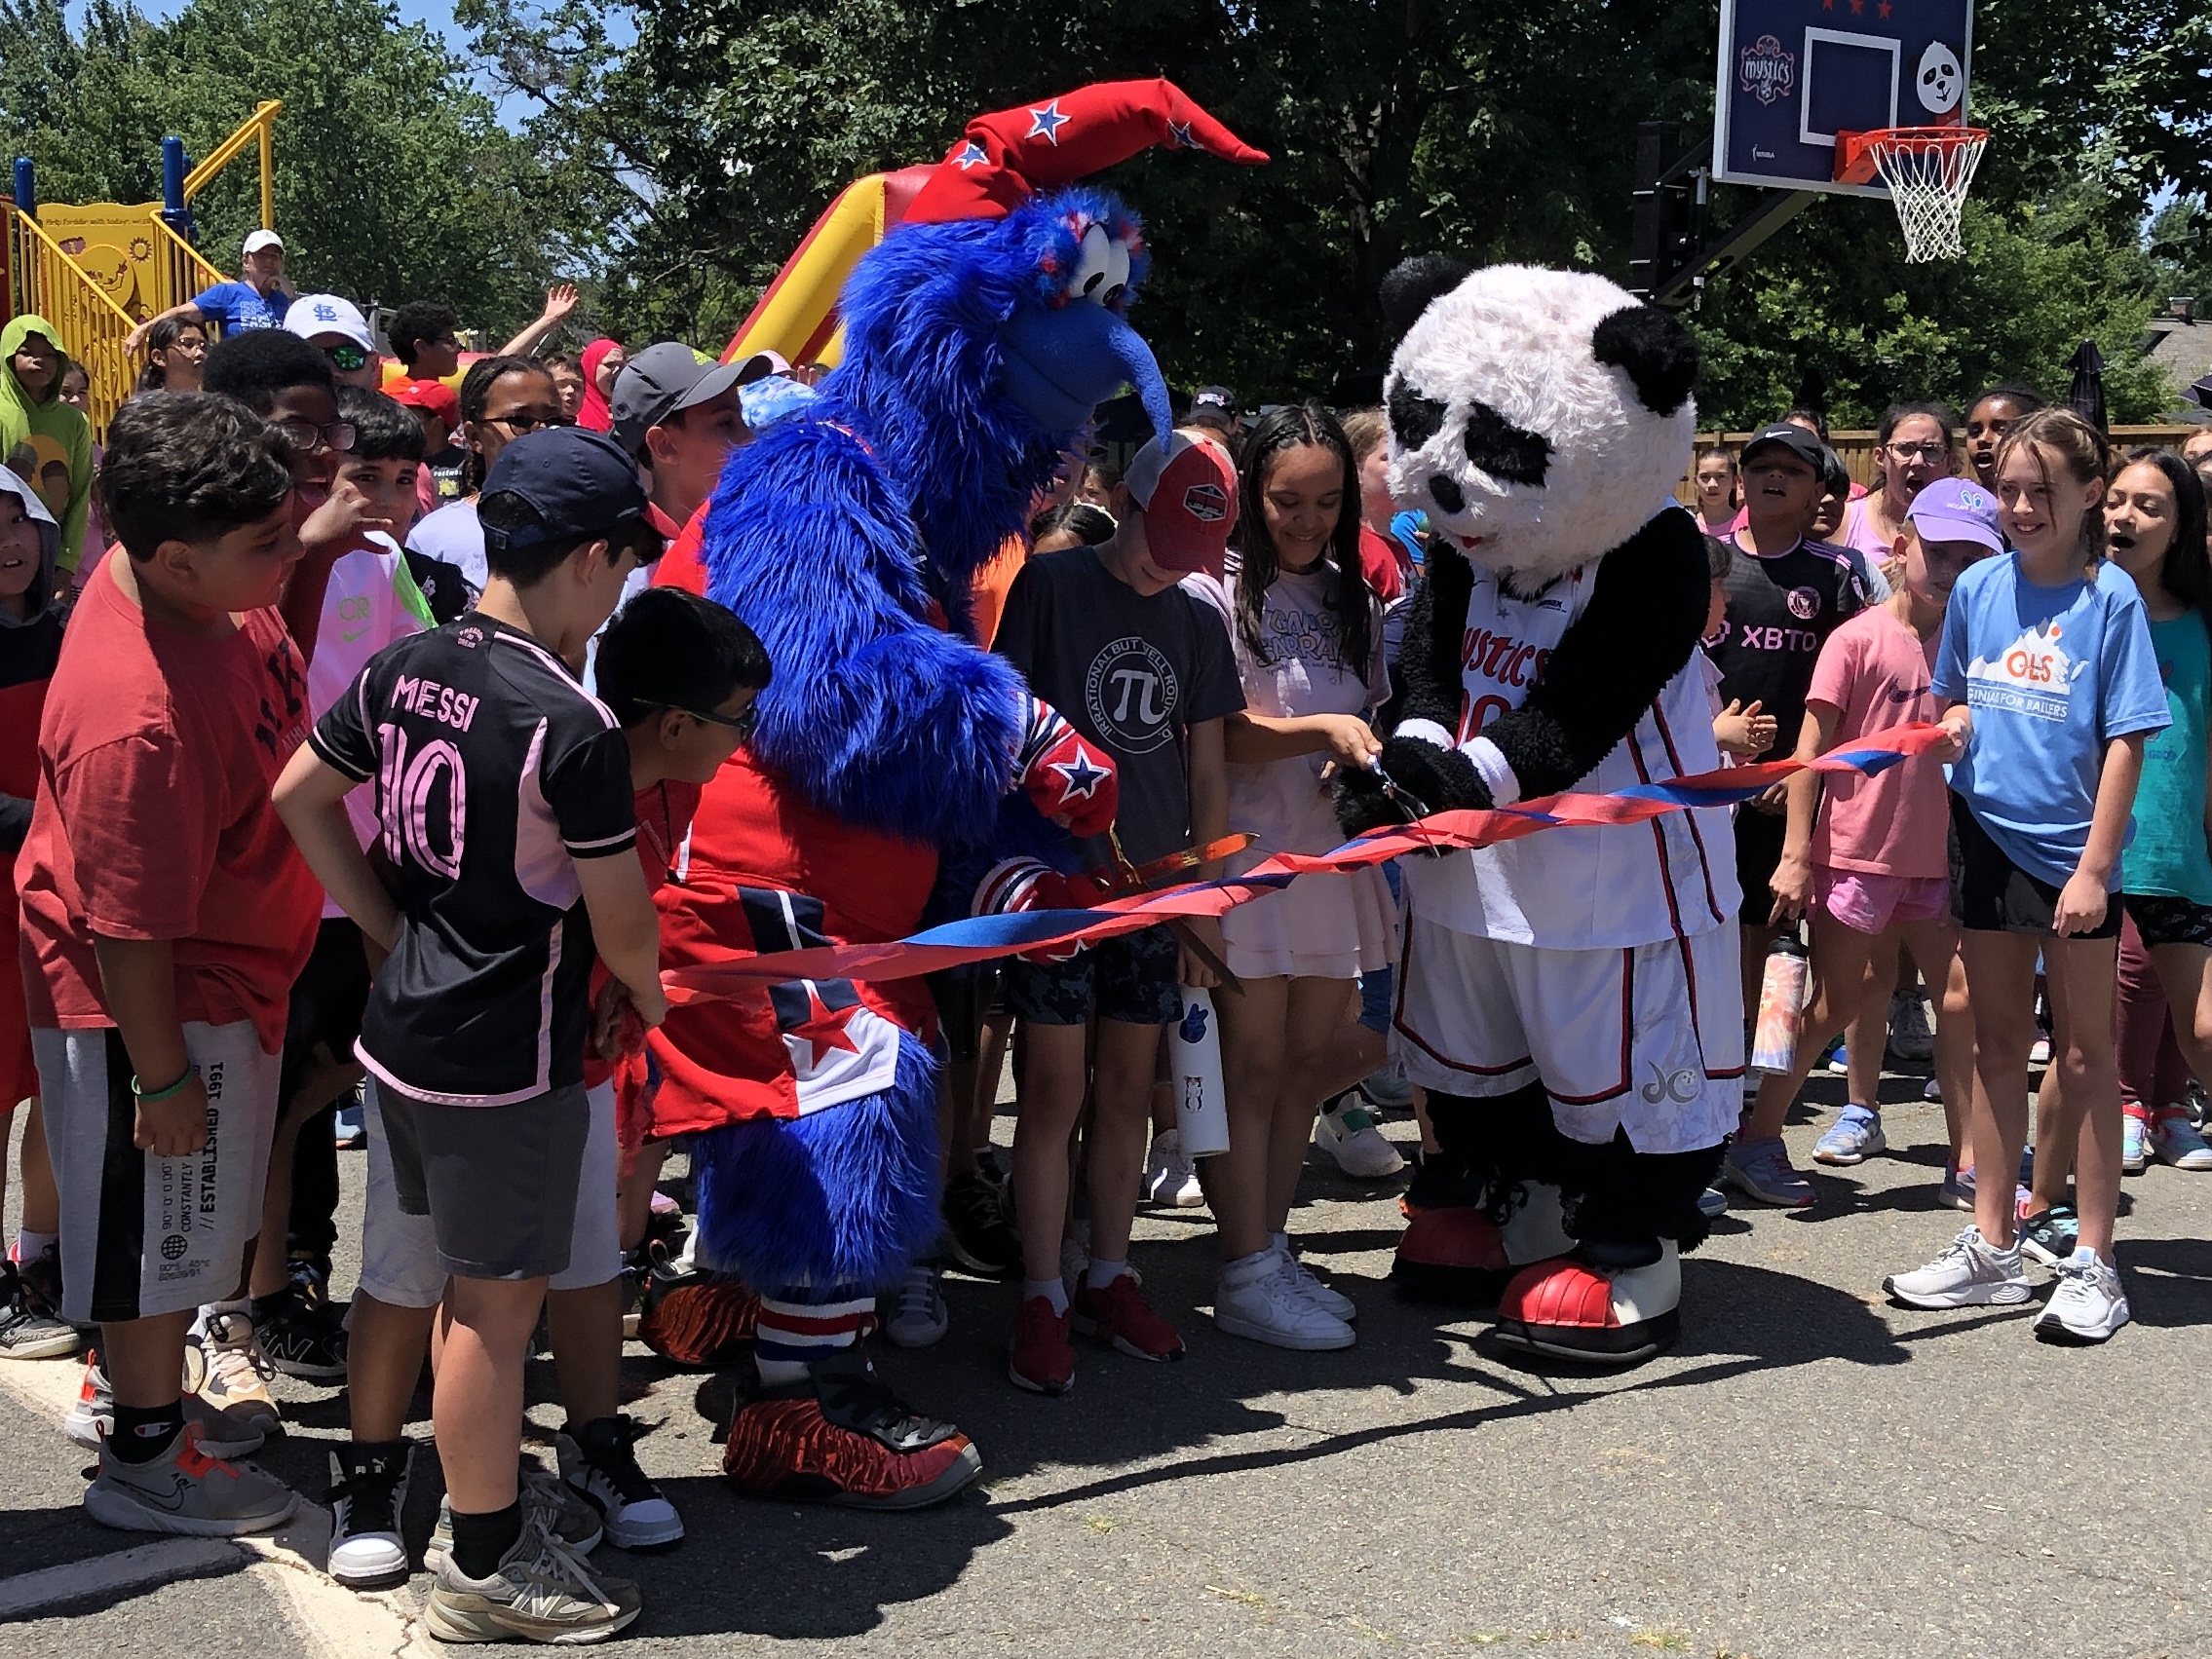 Mascots from the Washington Wizards and Mystics at a Ribbon Cutting Ceremony for new basketball hoops